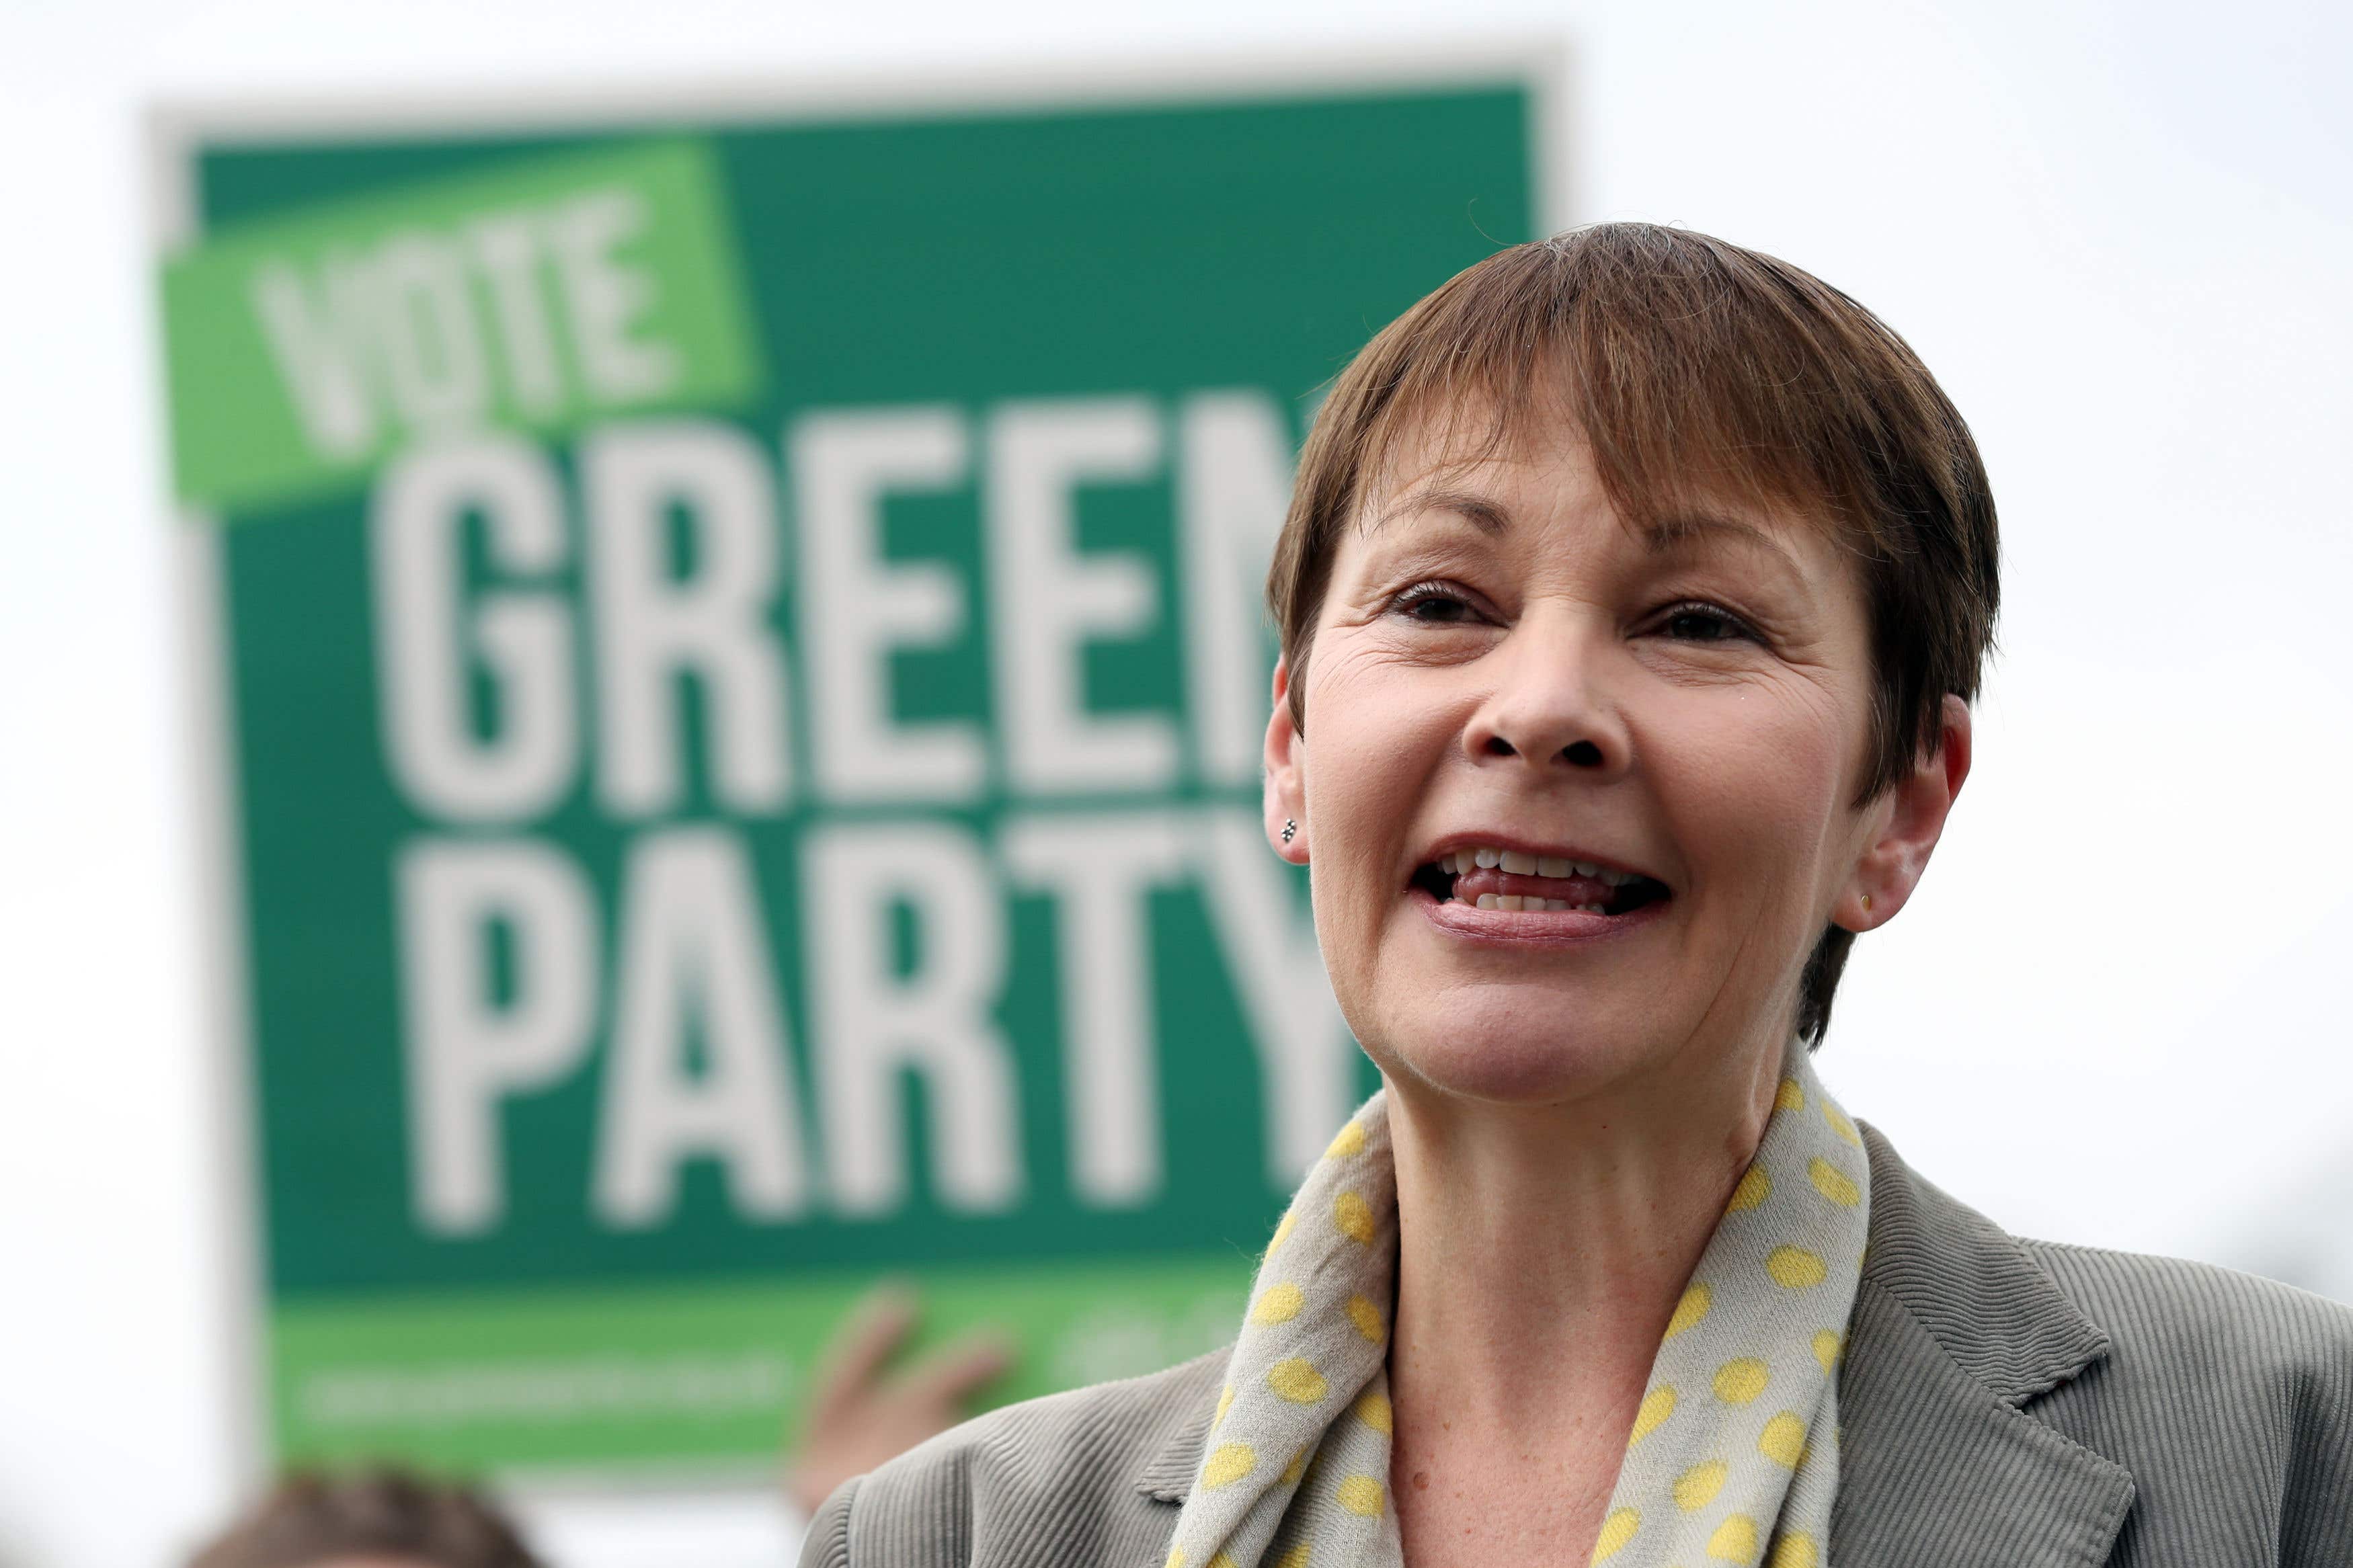 fury as green party member quits london assembly just three days after being elected